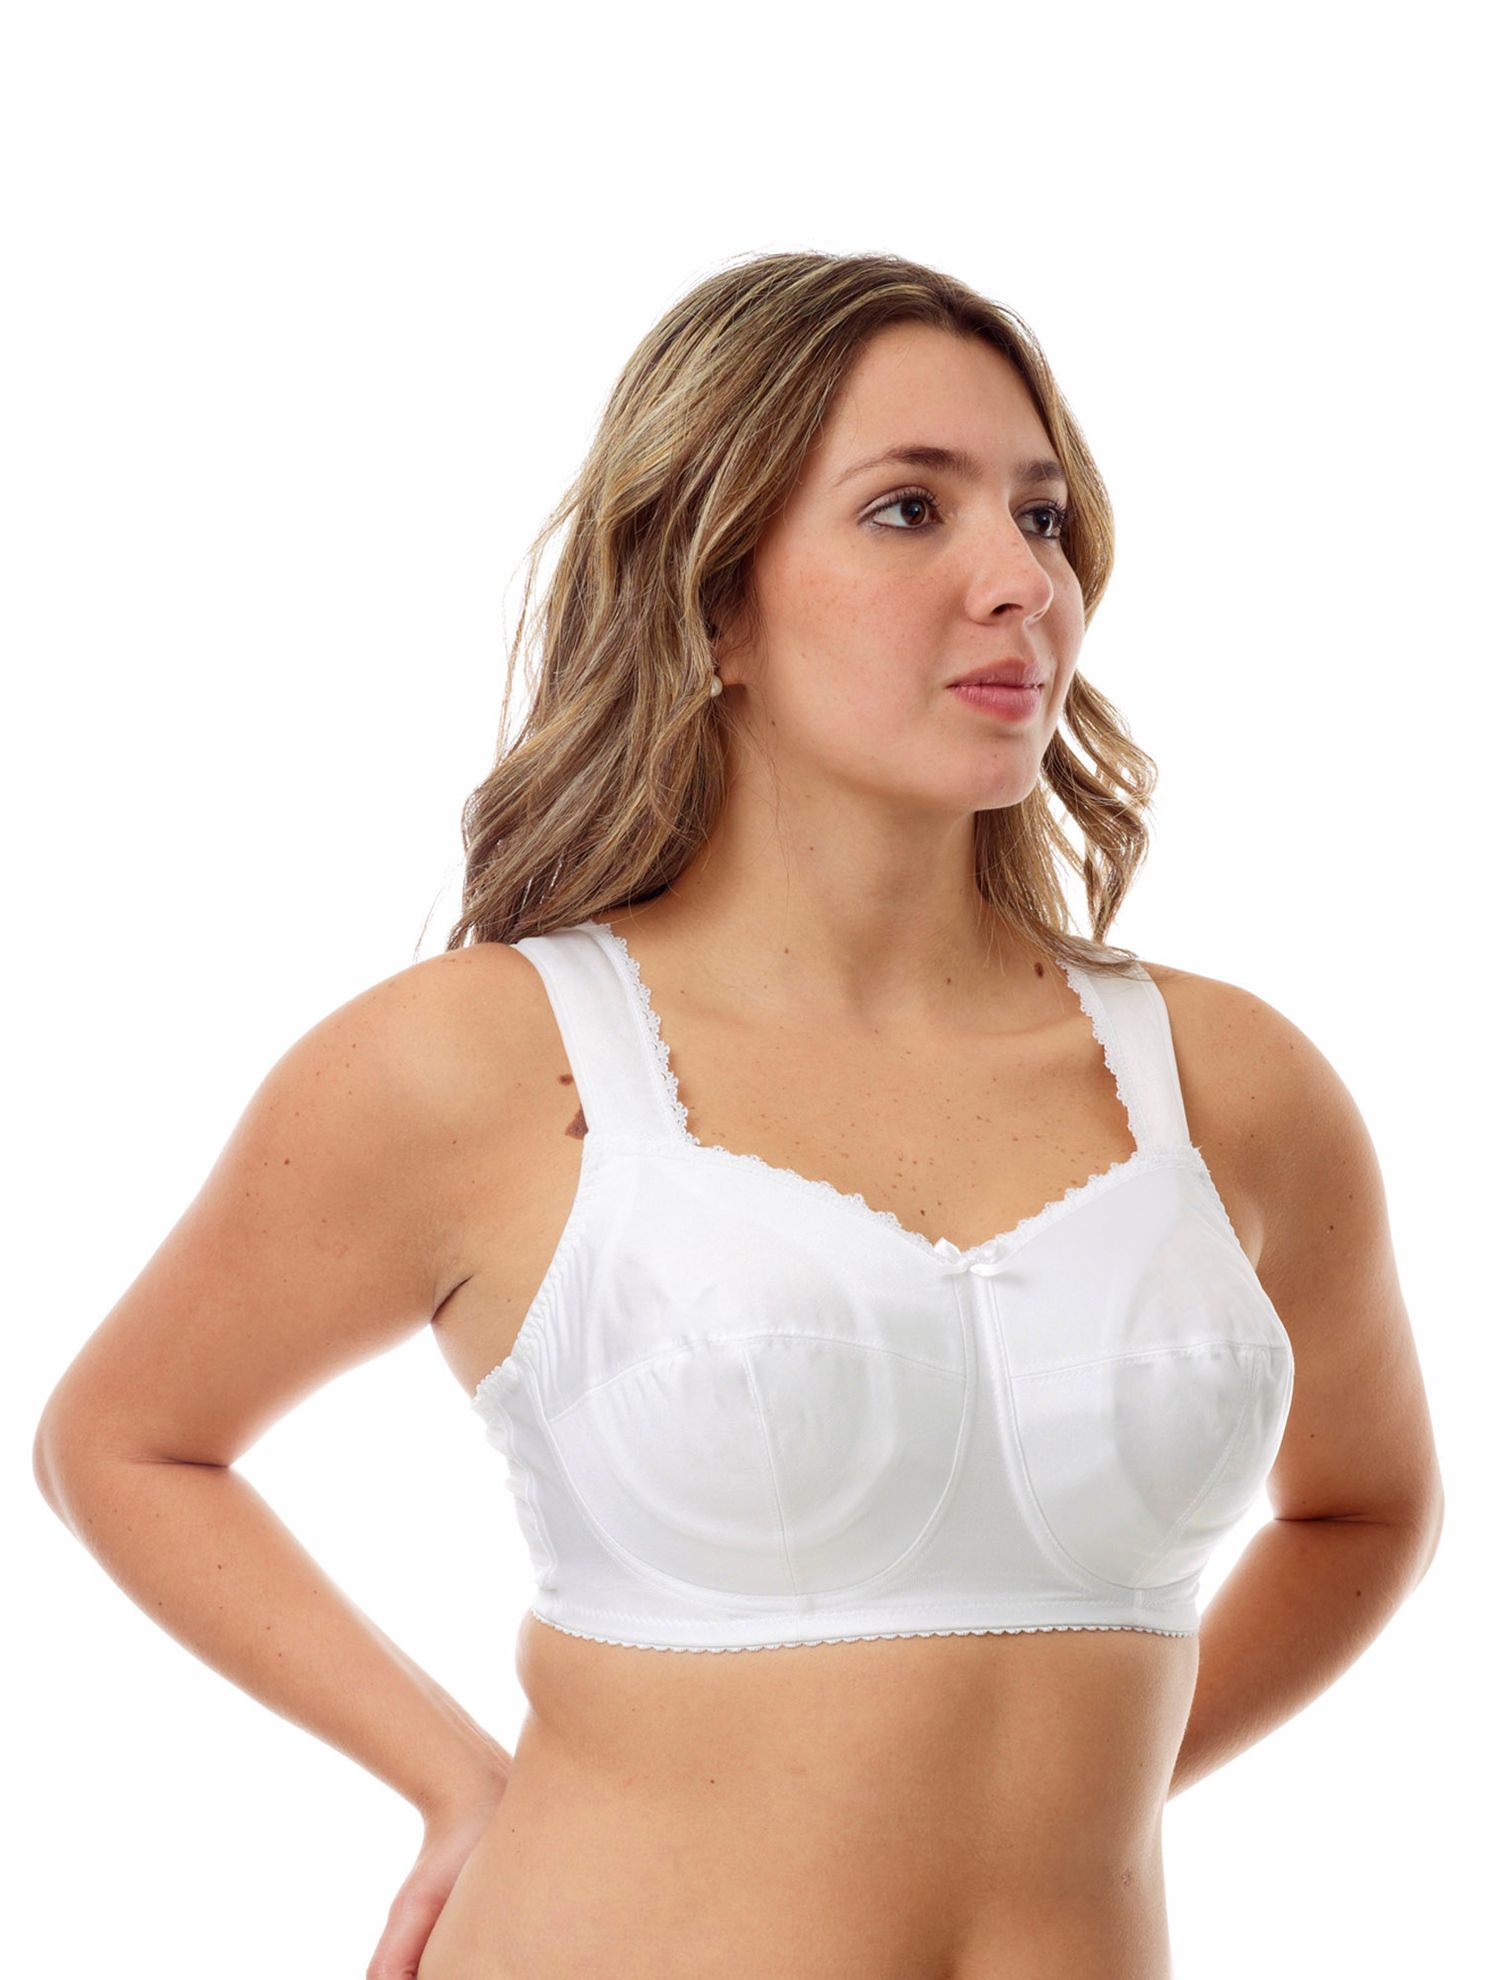 Full-Figure Support Bra, Free Shipping on Order $75+